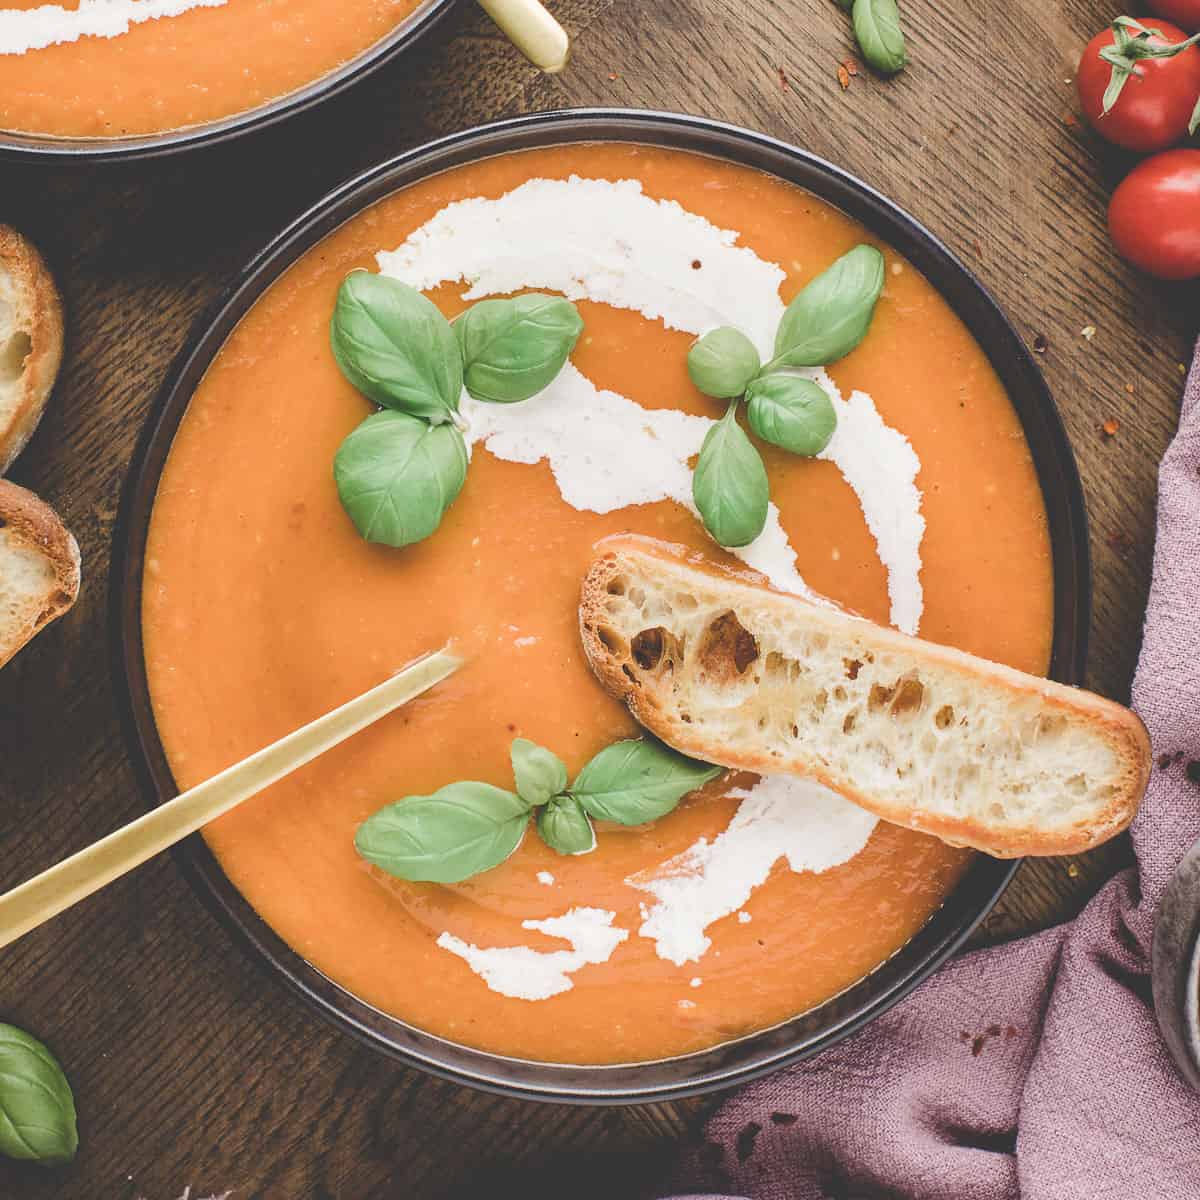 How to Make Tomato Soup with Fresh Tomatoes